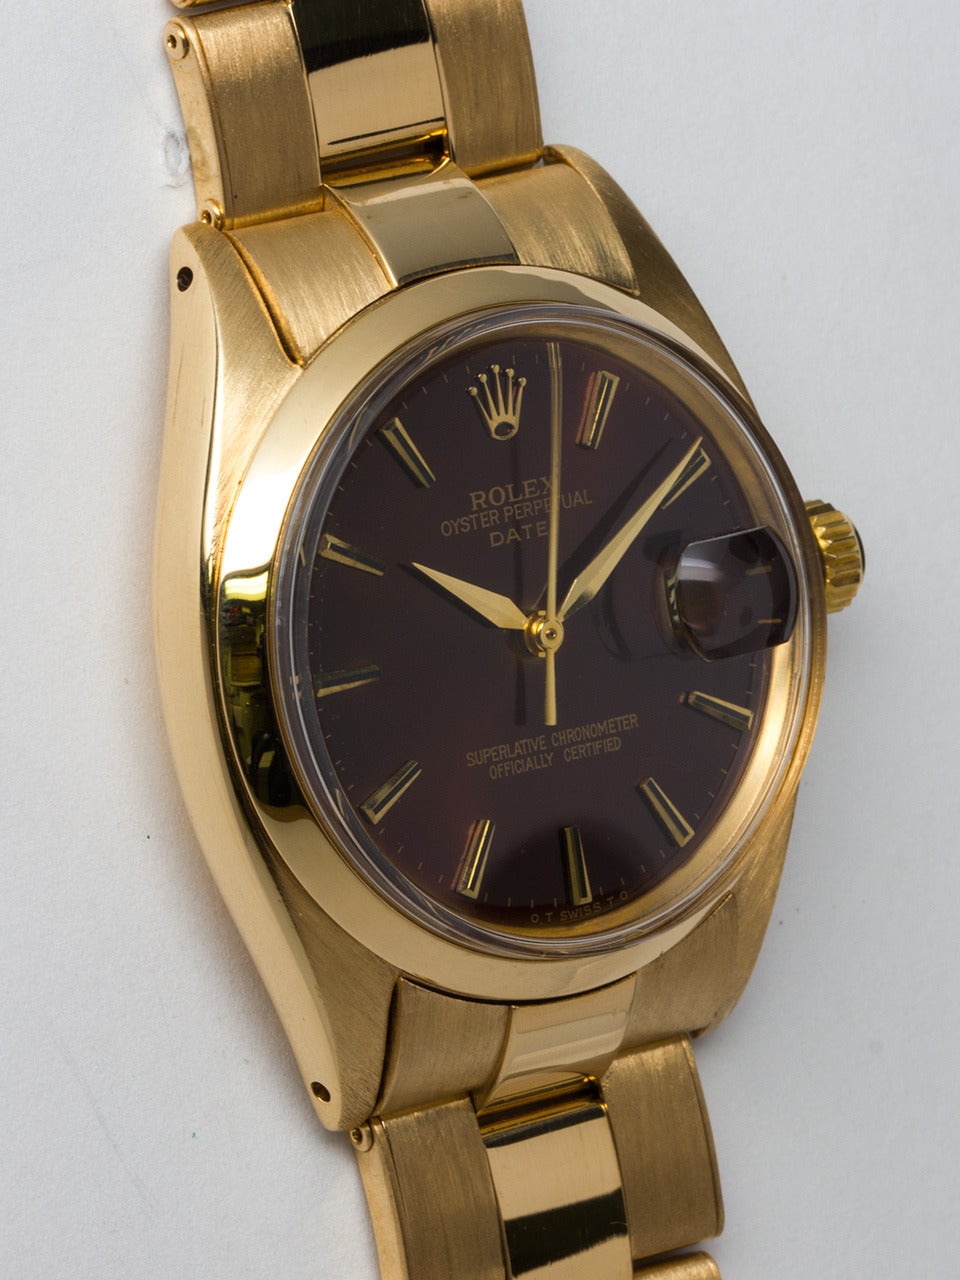 Rolex 18K Yellow Gold Oyster Perpetual Date ref 1500 serial # 5.2 million circa 1978. 34mm diameter case with smooth bezel and acrylic crystal. Custom colored 